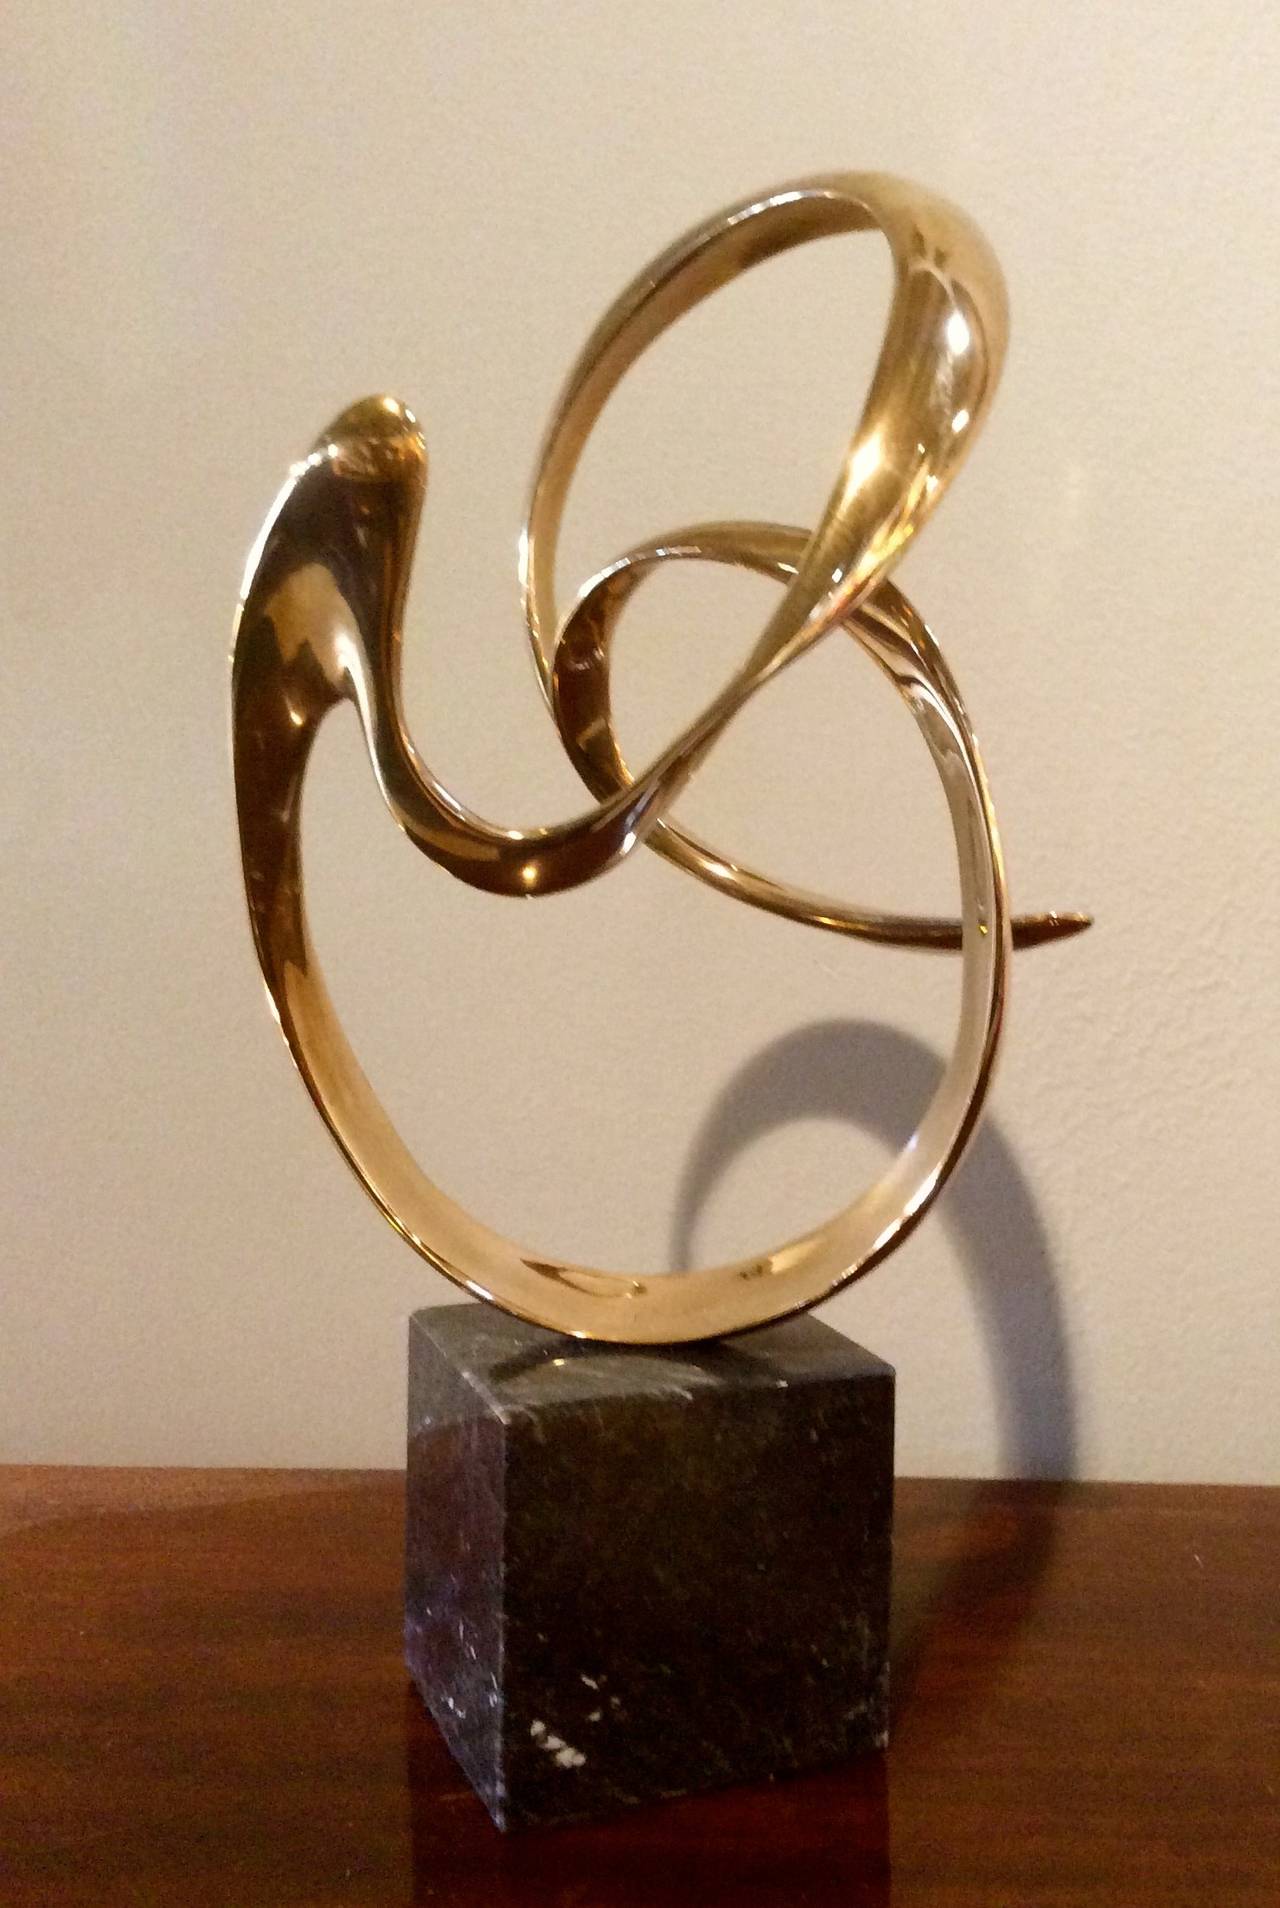 Lyrical bronze abstract sculpture by noted artist Tom Bennett, signed, dated 1987, and numbered 94/150. 
Mounted on a solid 3.5